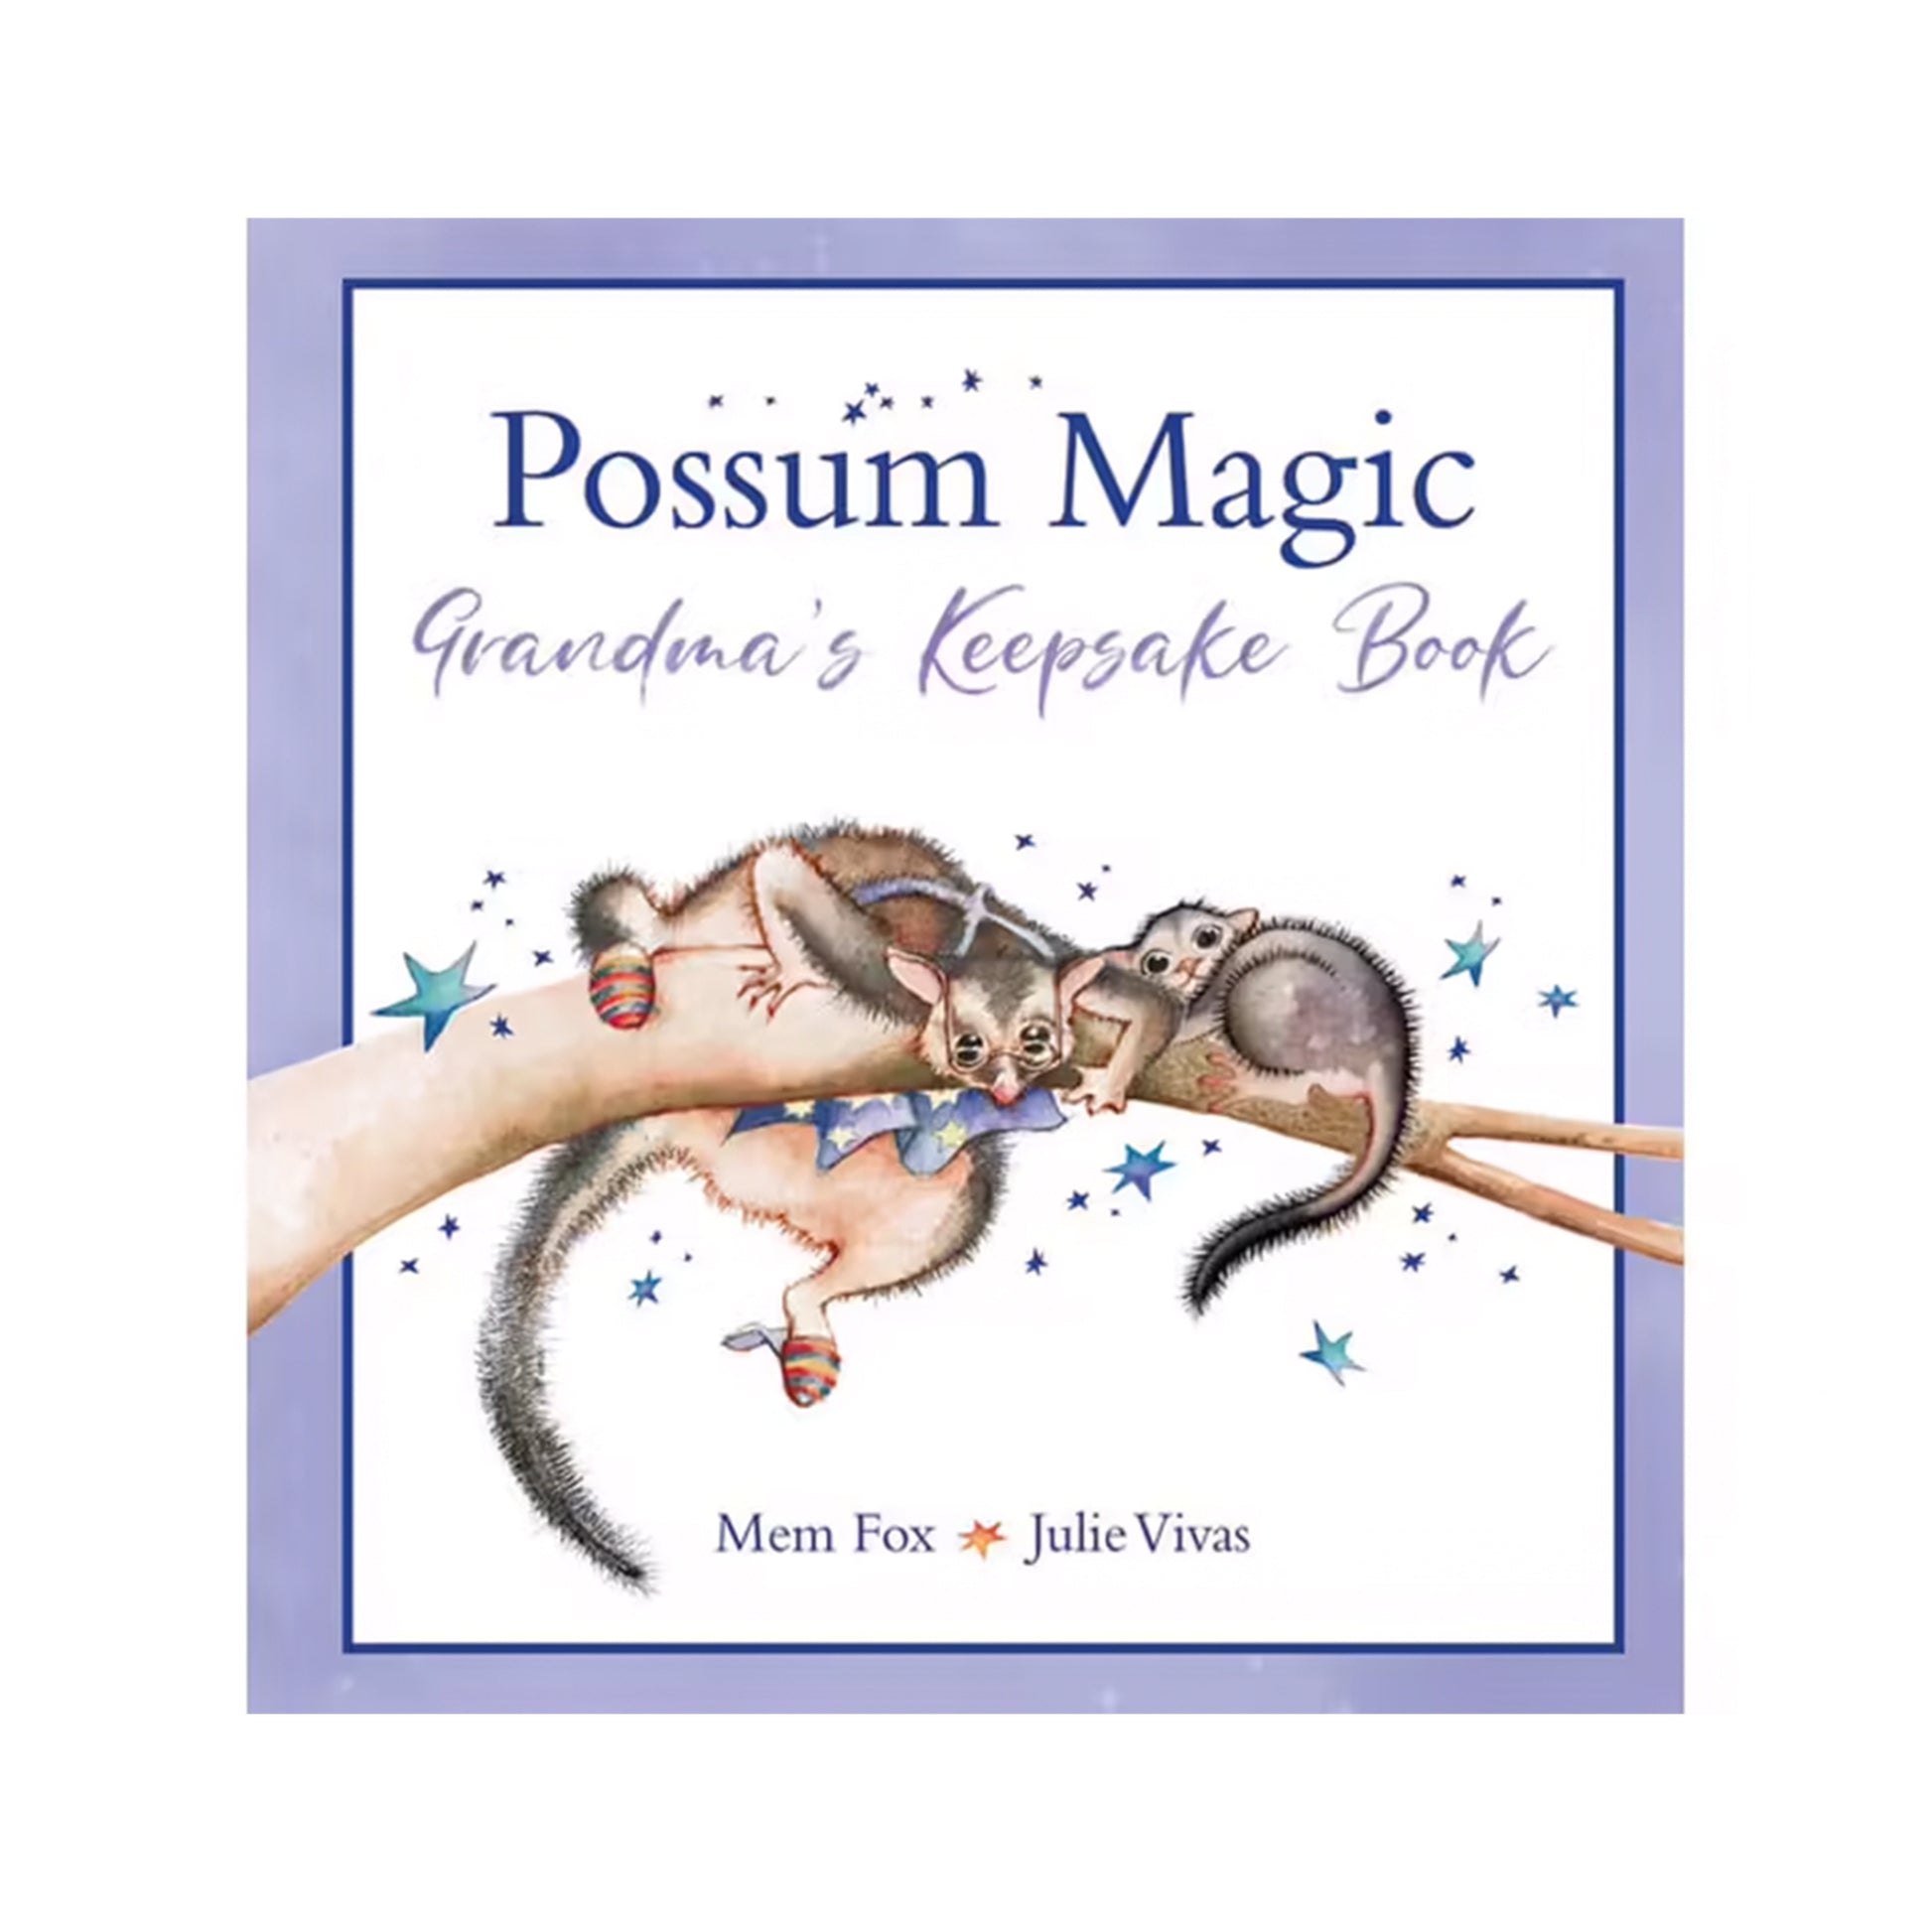 A colorful children's book cover with a magical possum and her loving grandma.